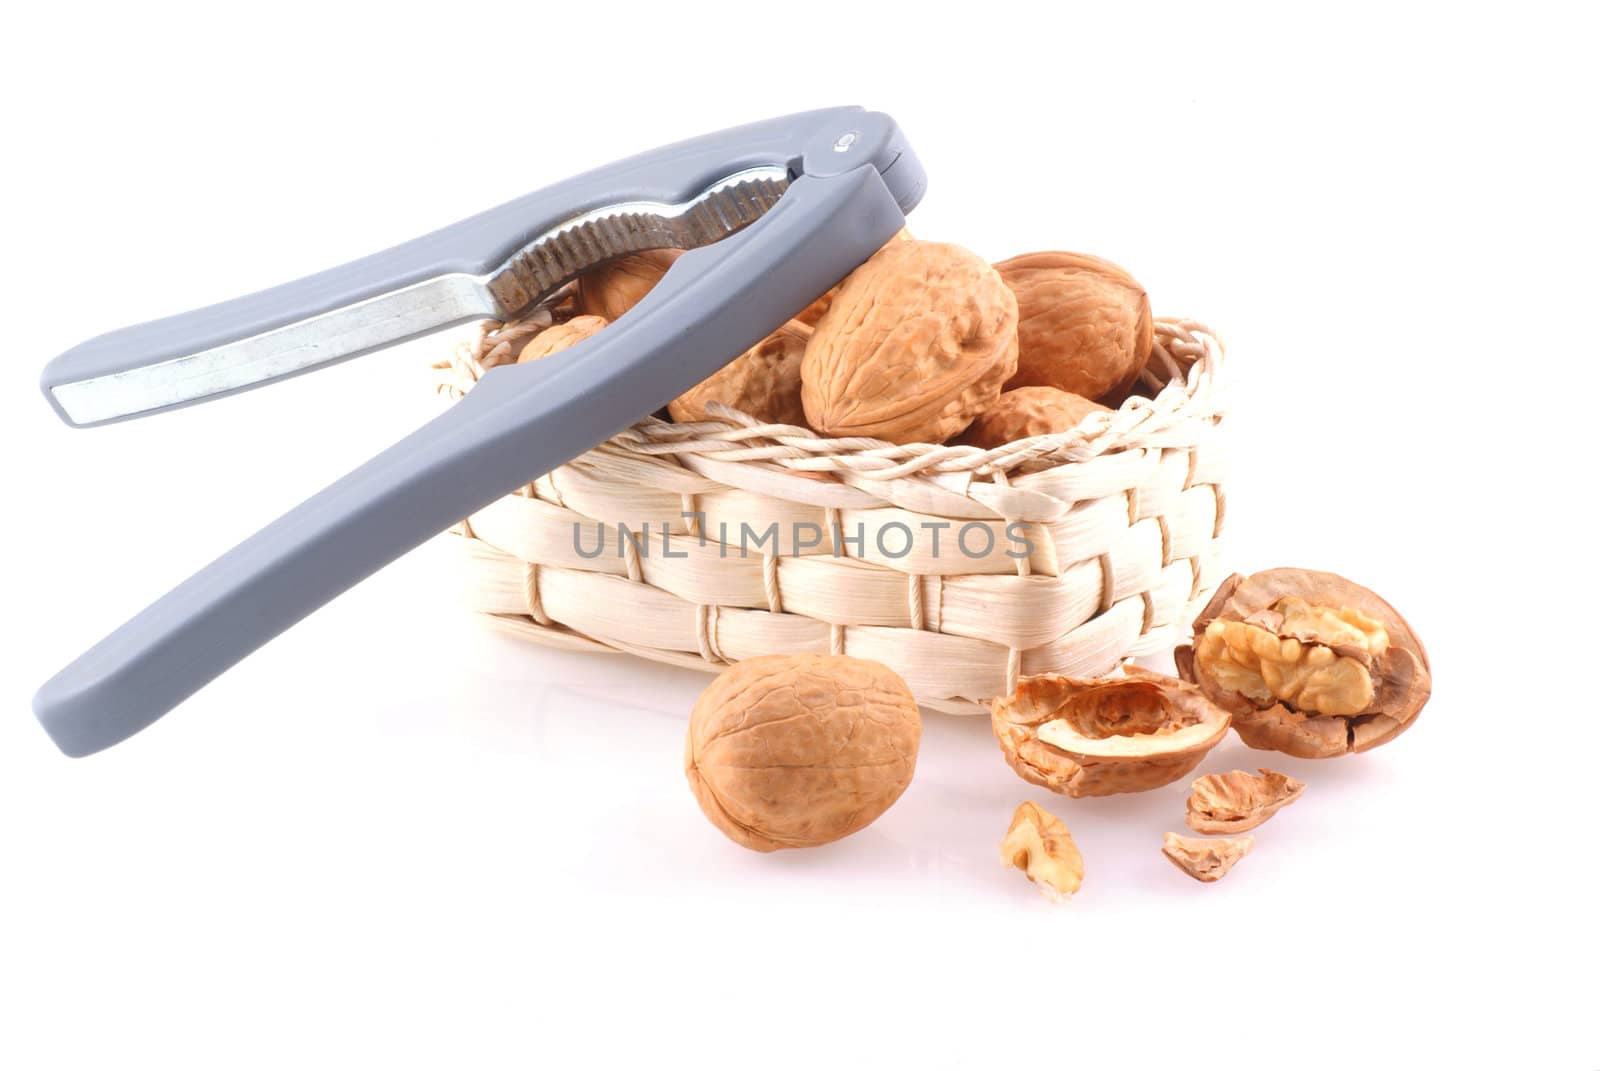 Basket full of walnuts with nutcracker, isolated on white.